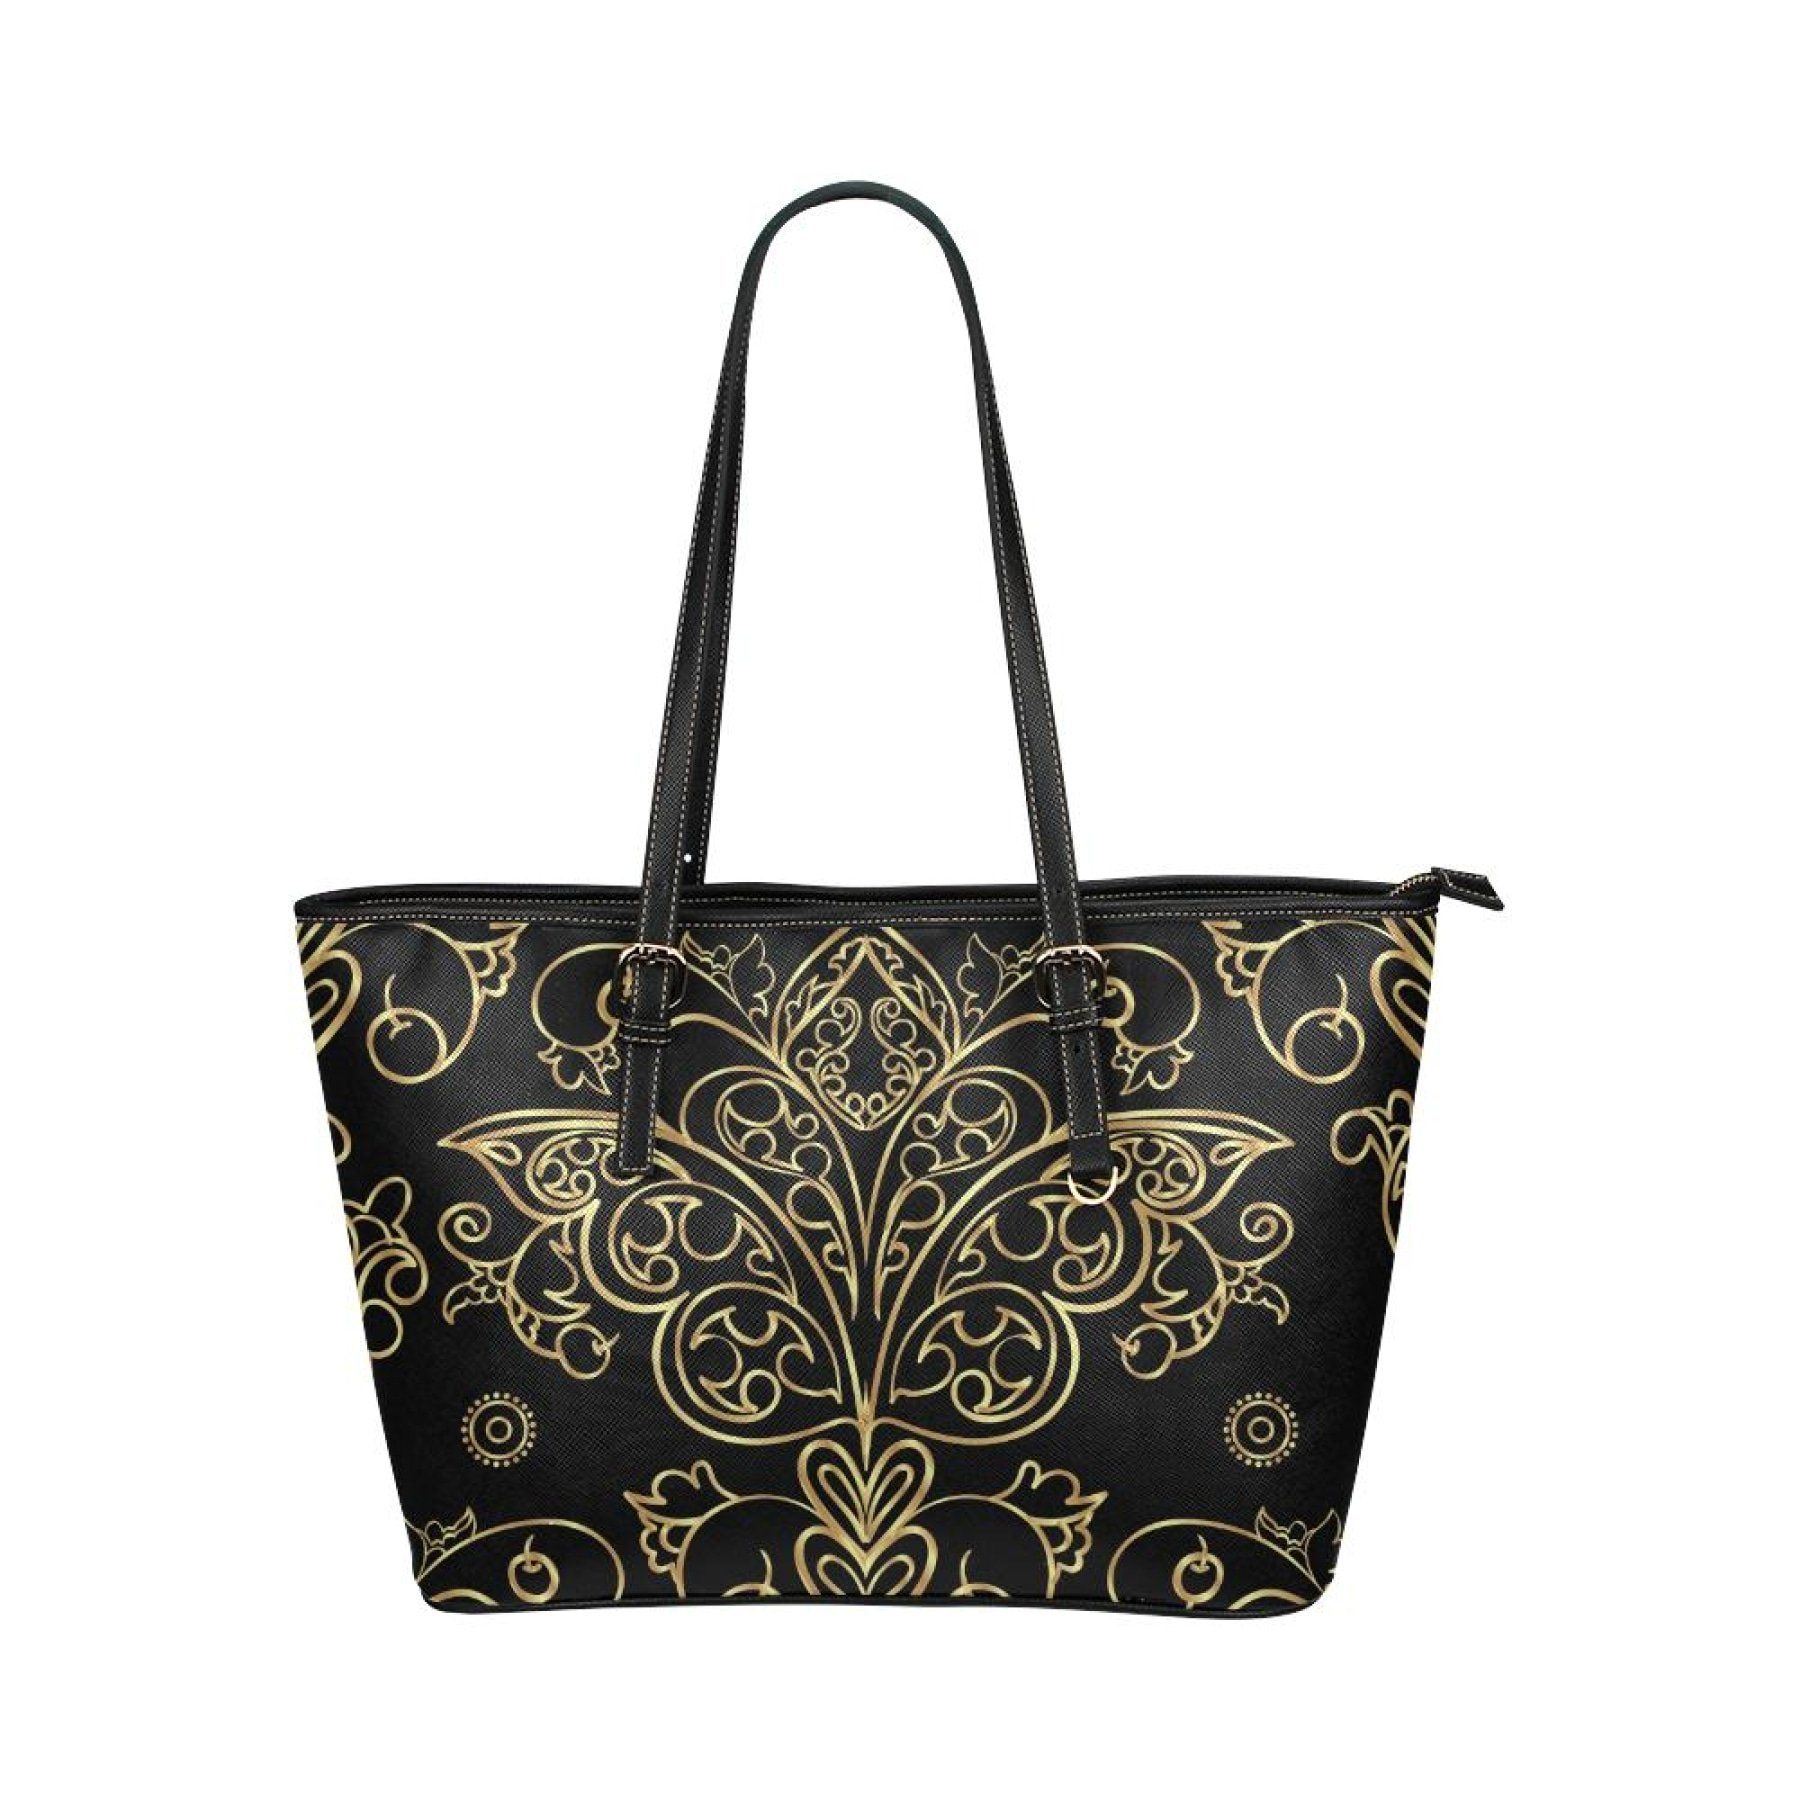 Black And Gold Vintage Butterfly Style Leather Tote Bag 14